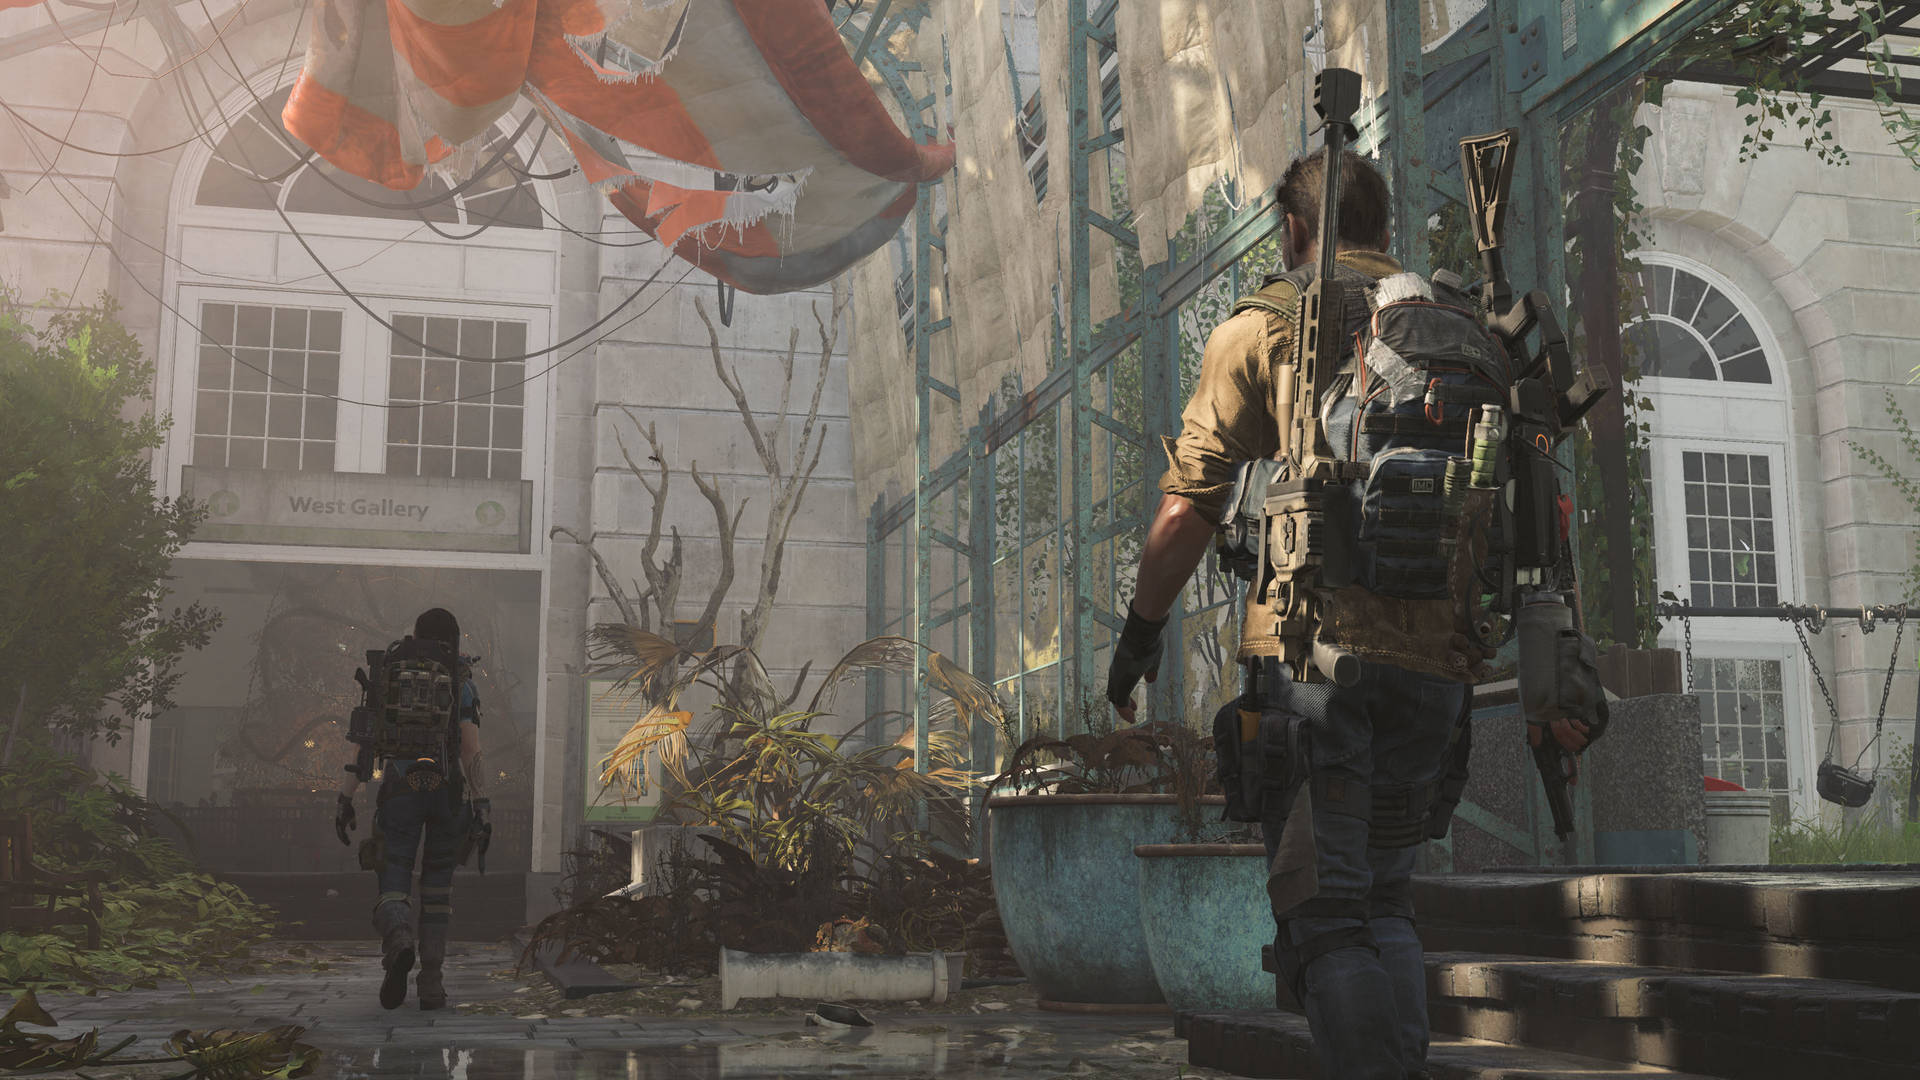 High-resolution Image Of The Division 4k: Confrontation At The Mansion Battlefield Background